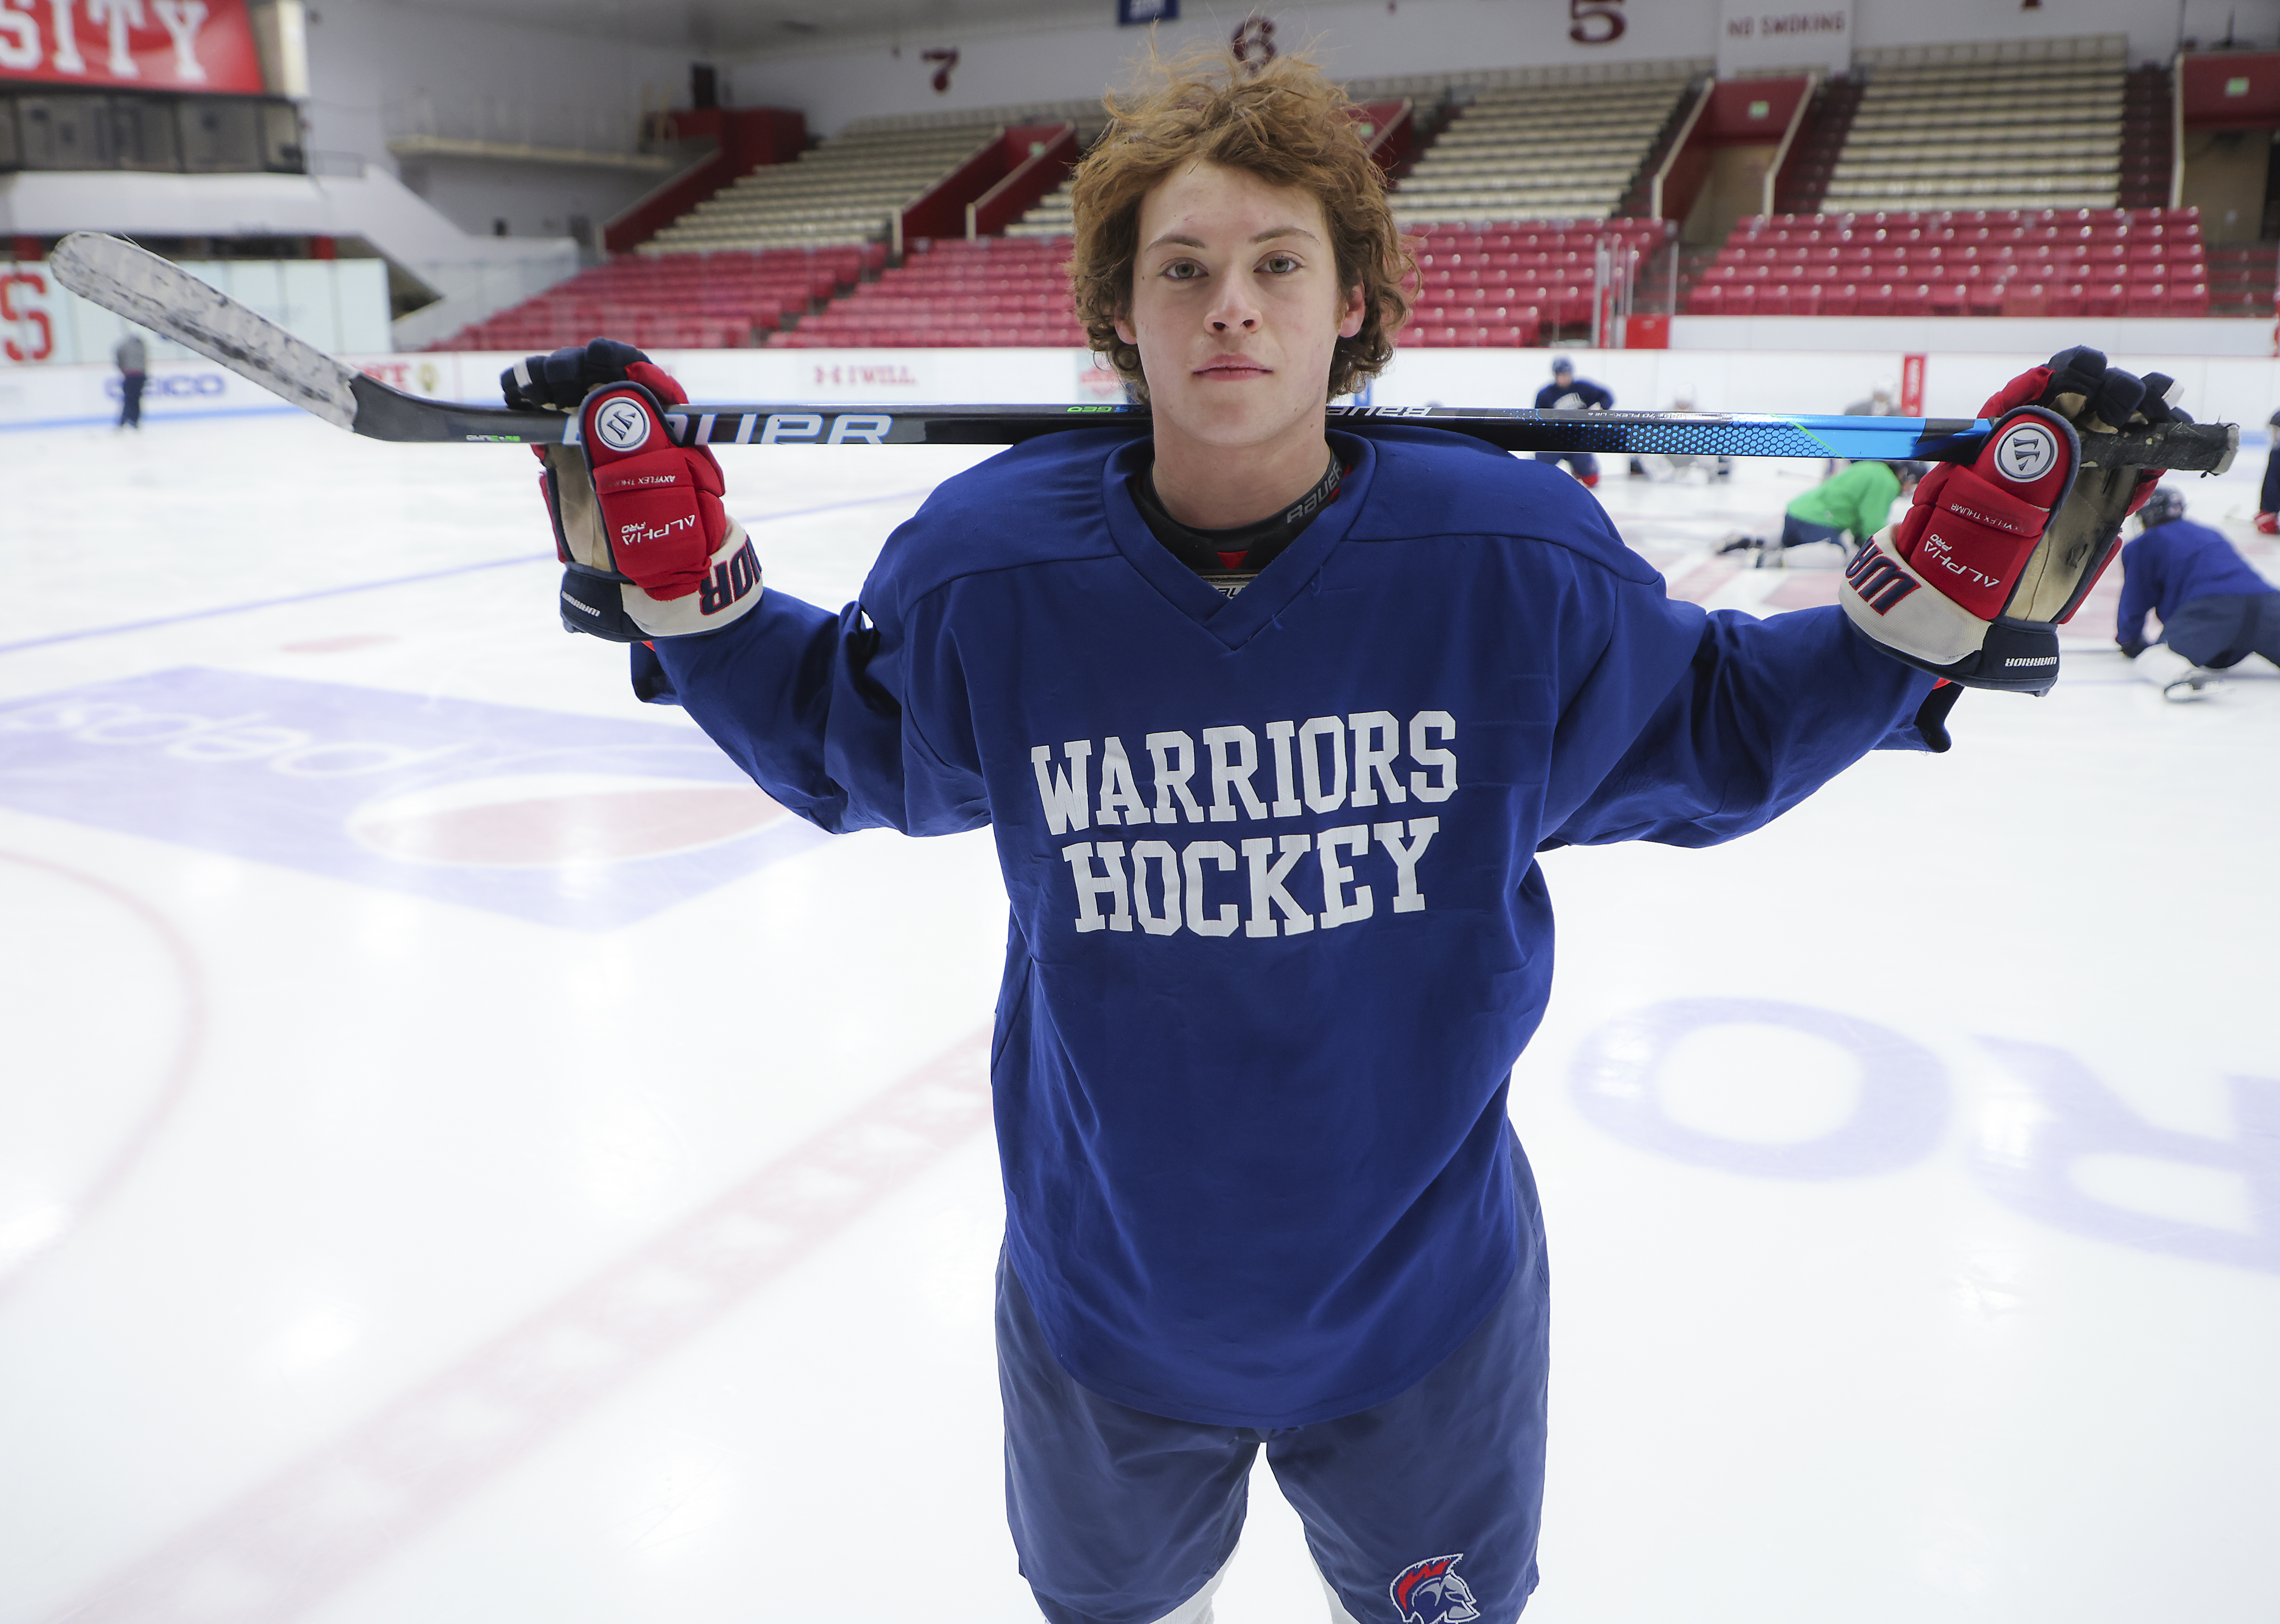 Brookline senior captain Jacob Gurdin delivers a meaningful assist to the Travis Roy Foundation